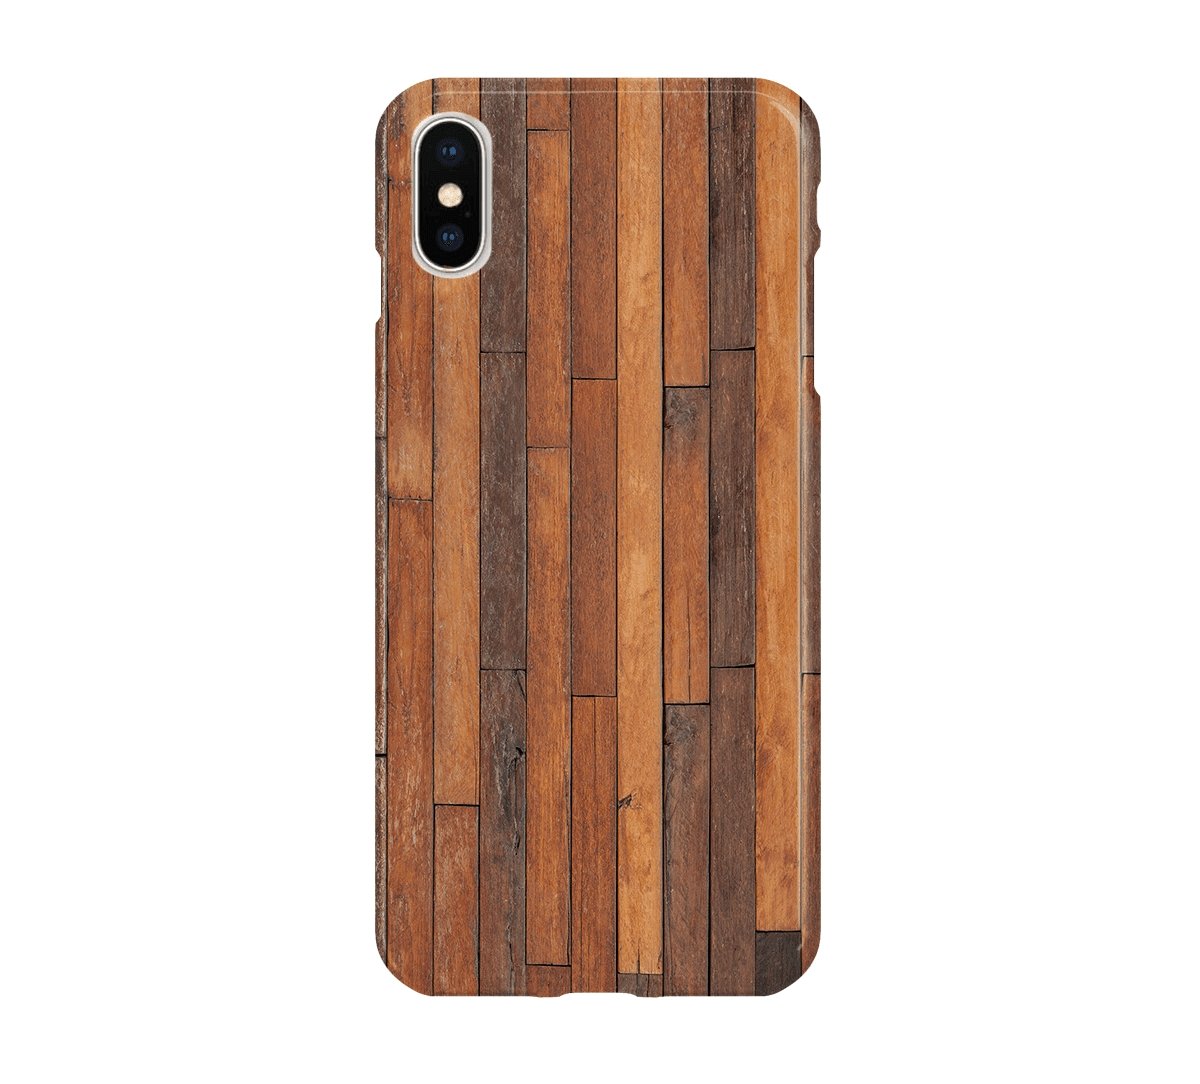 Rustic Steps - iPhone phone case designs by CaseSwagger